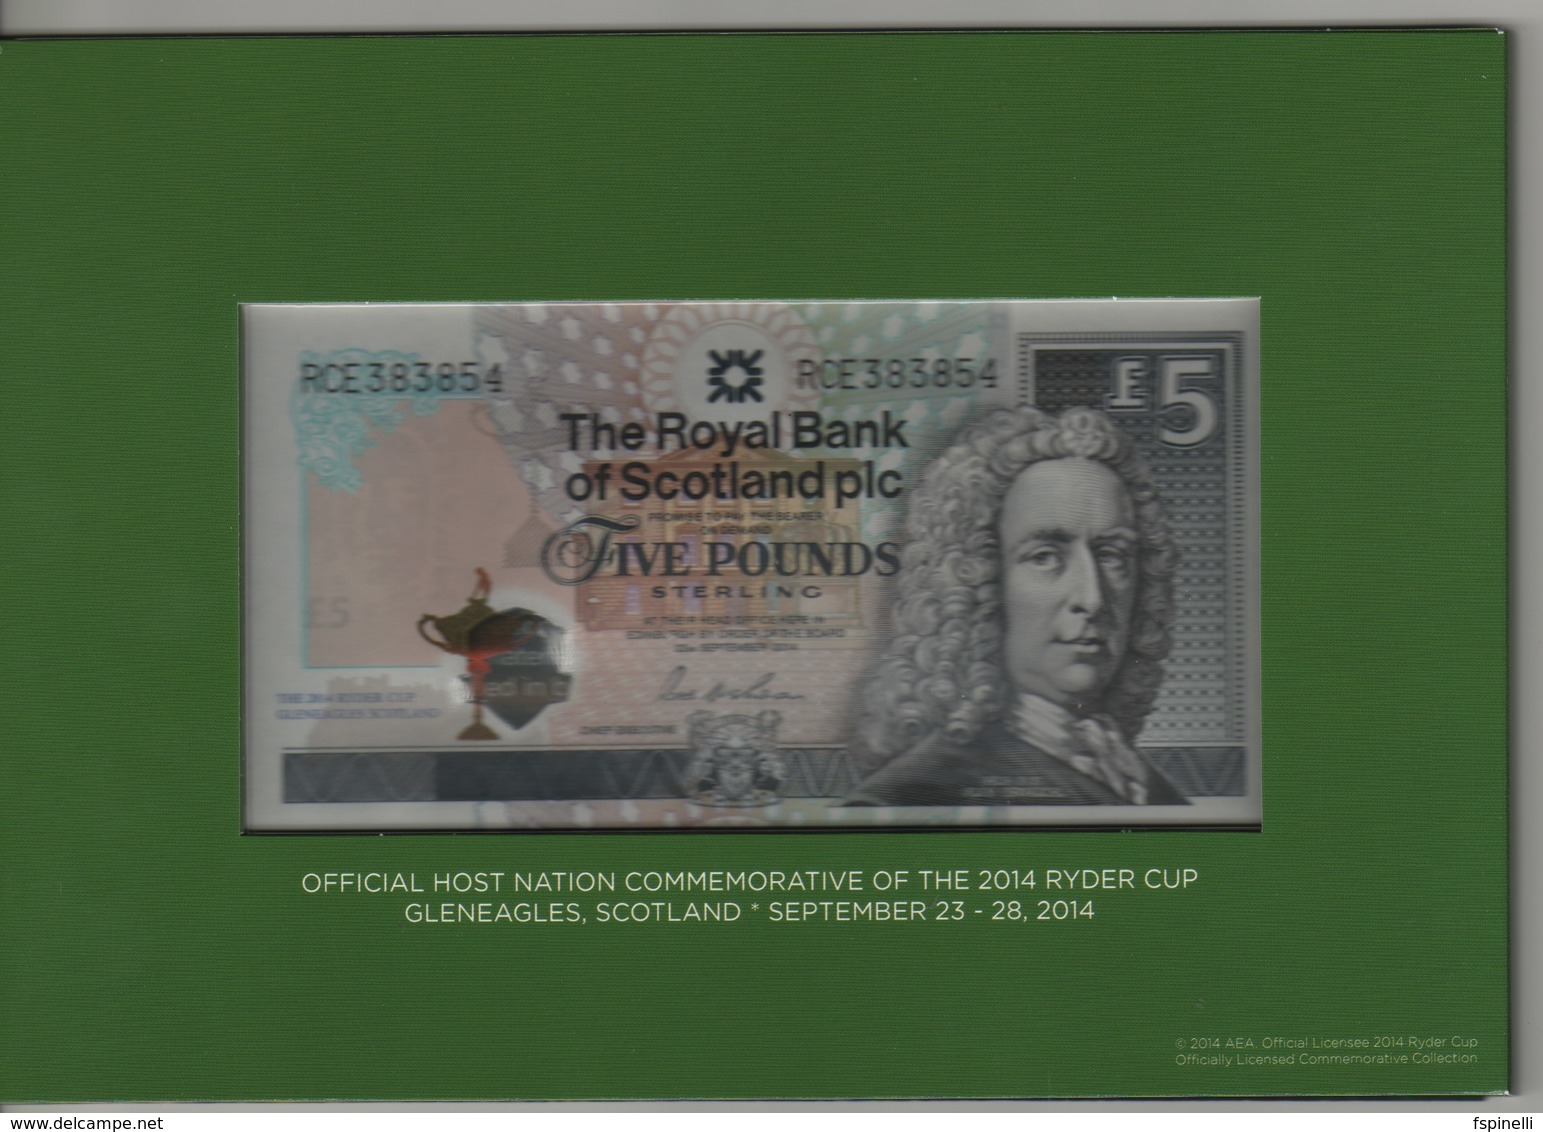 SCOTLAND   £5  "The Royal Bank Of Scotland"   P369 Commemorative  (GOLF  Ryder Cup Jubilee) 22.9.2014   UNC - 5 Pounds